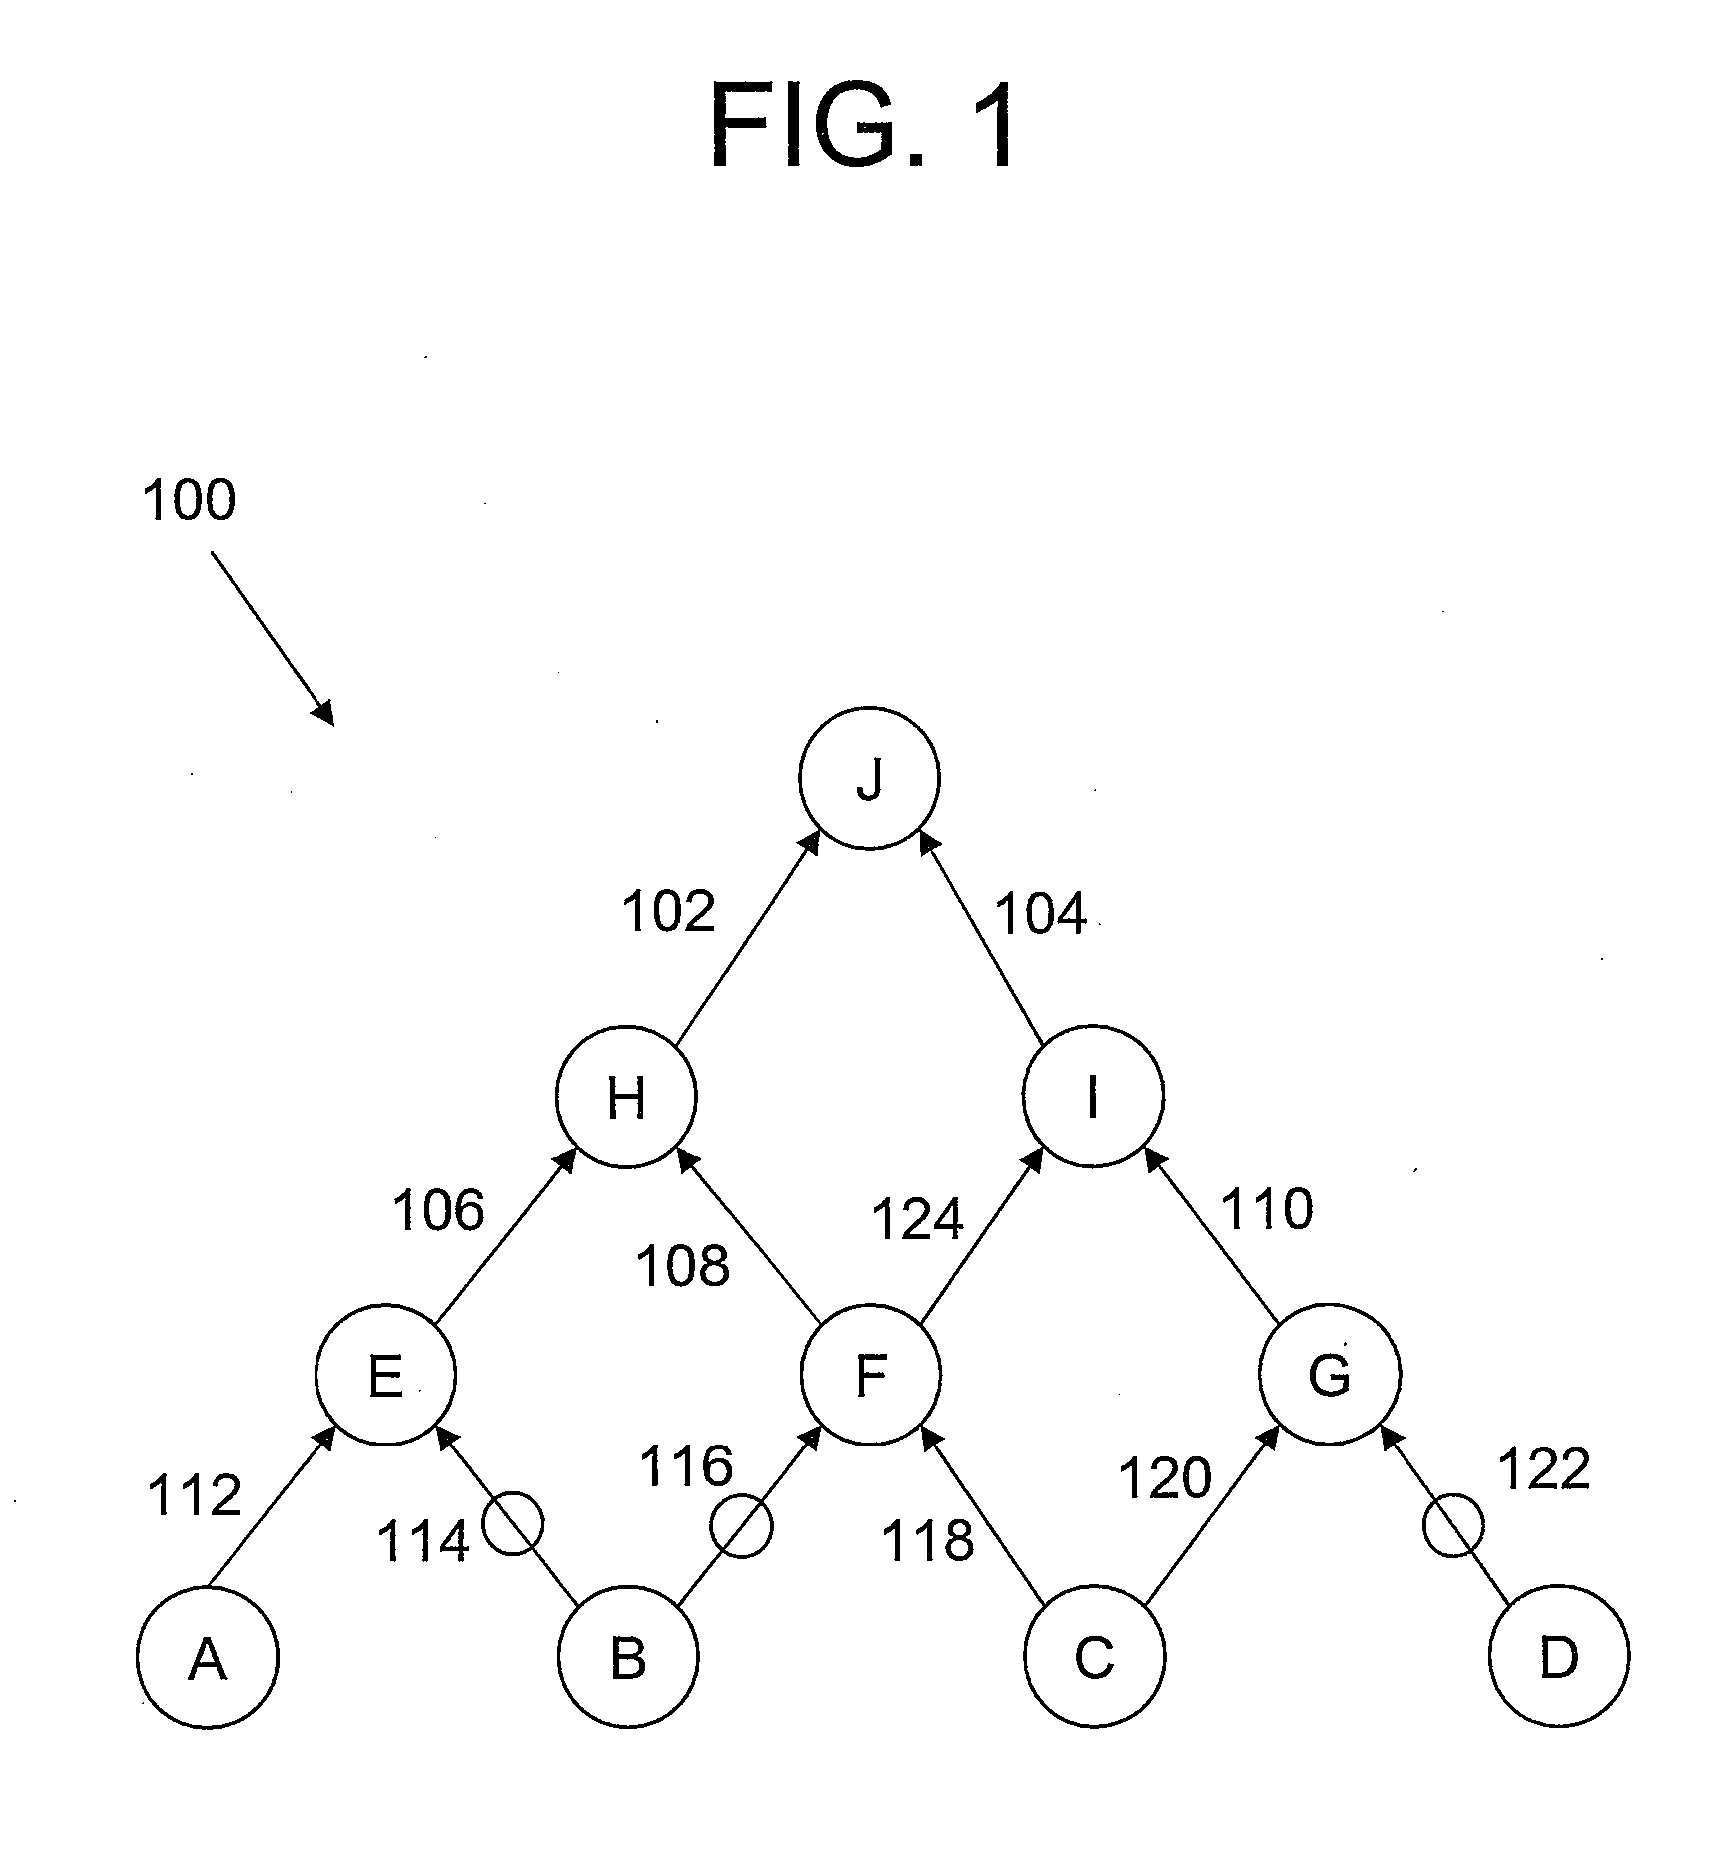 Method and System for Conjunctive BDD Building and Variable Quantification Using Case-Splitting